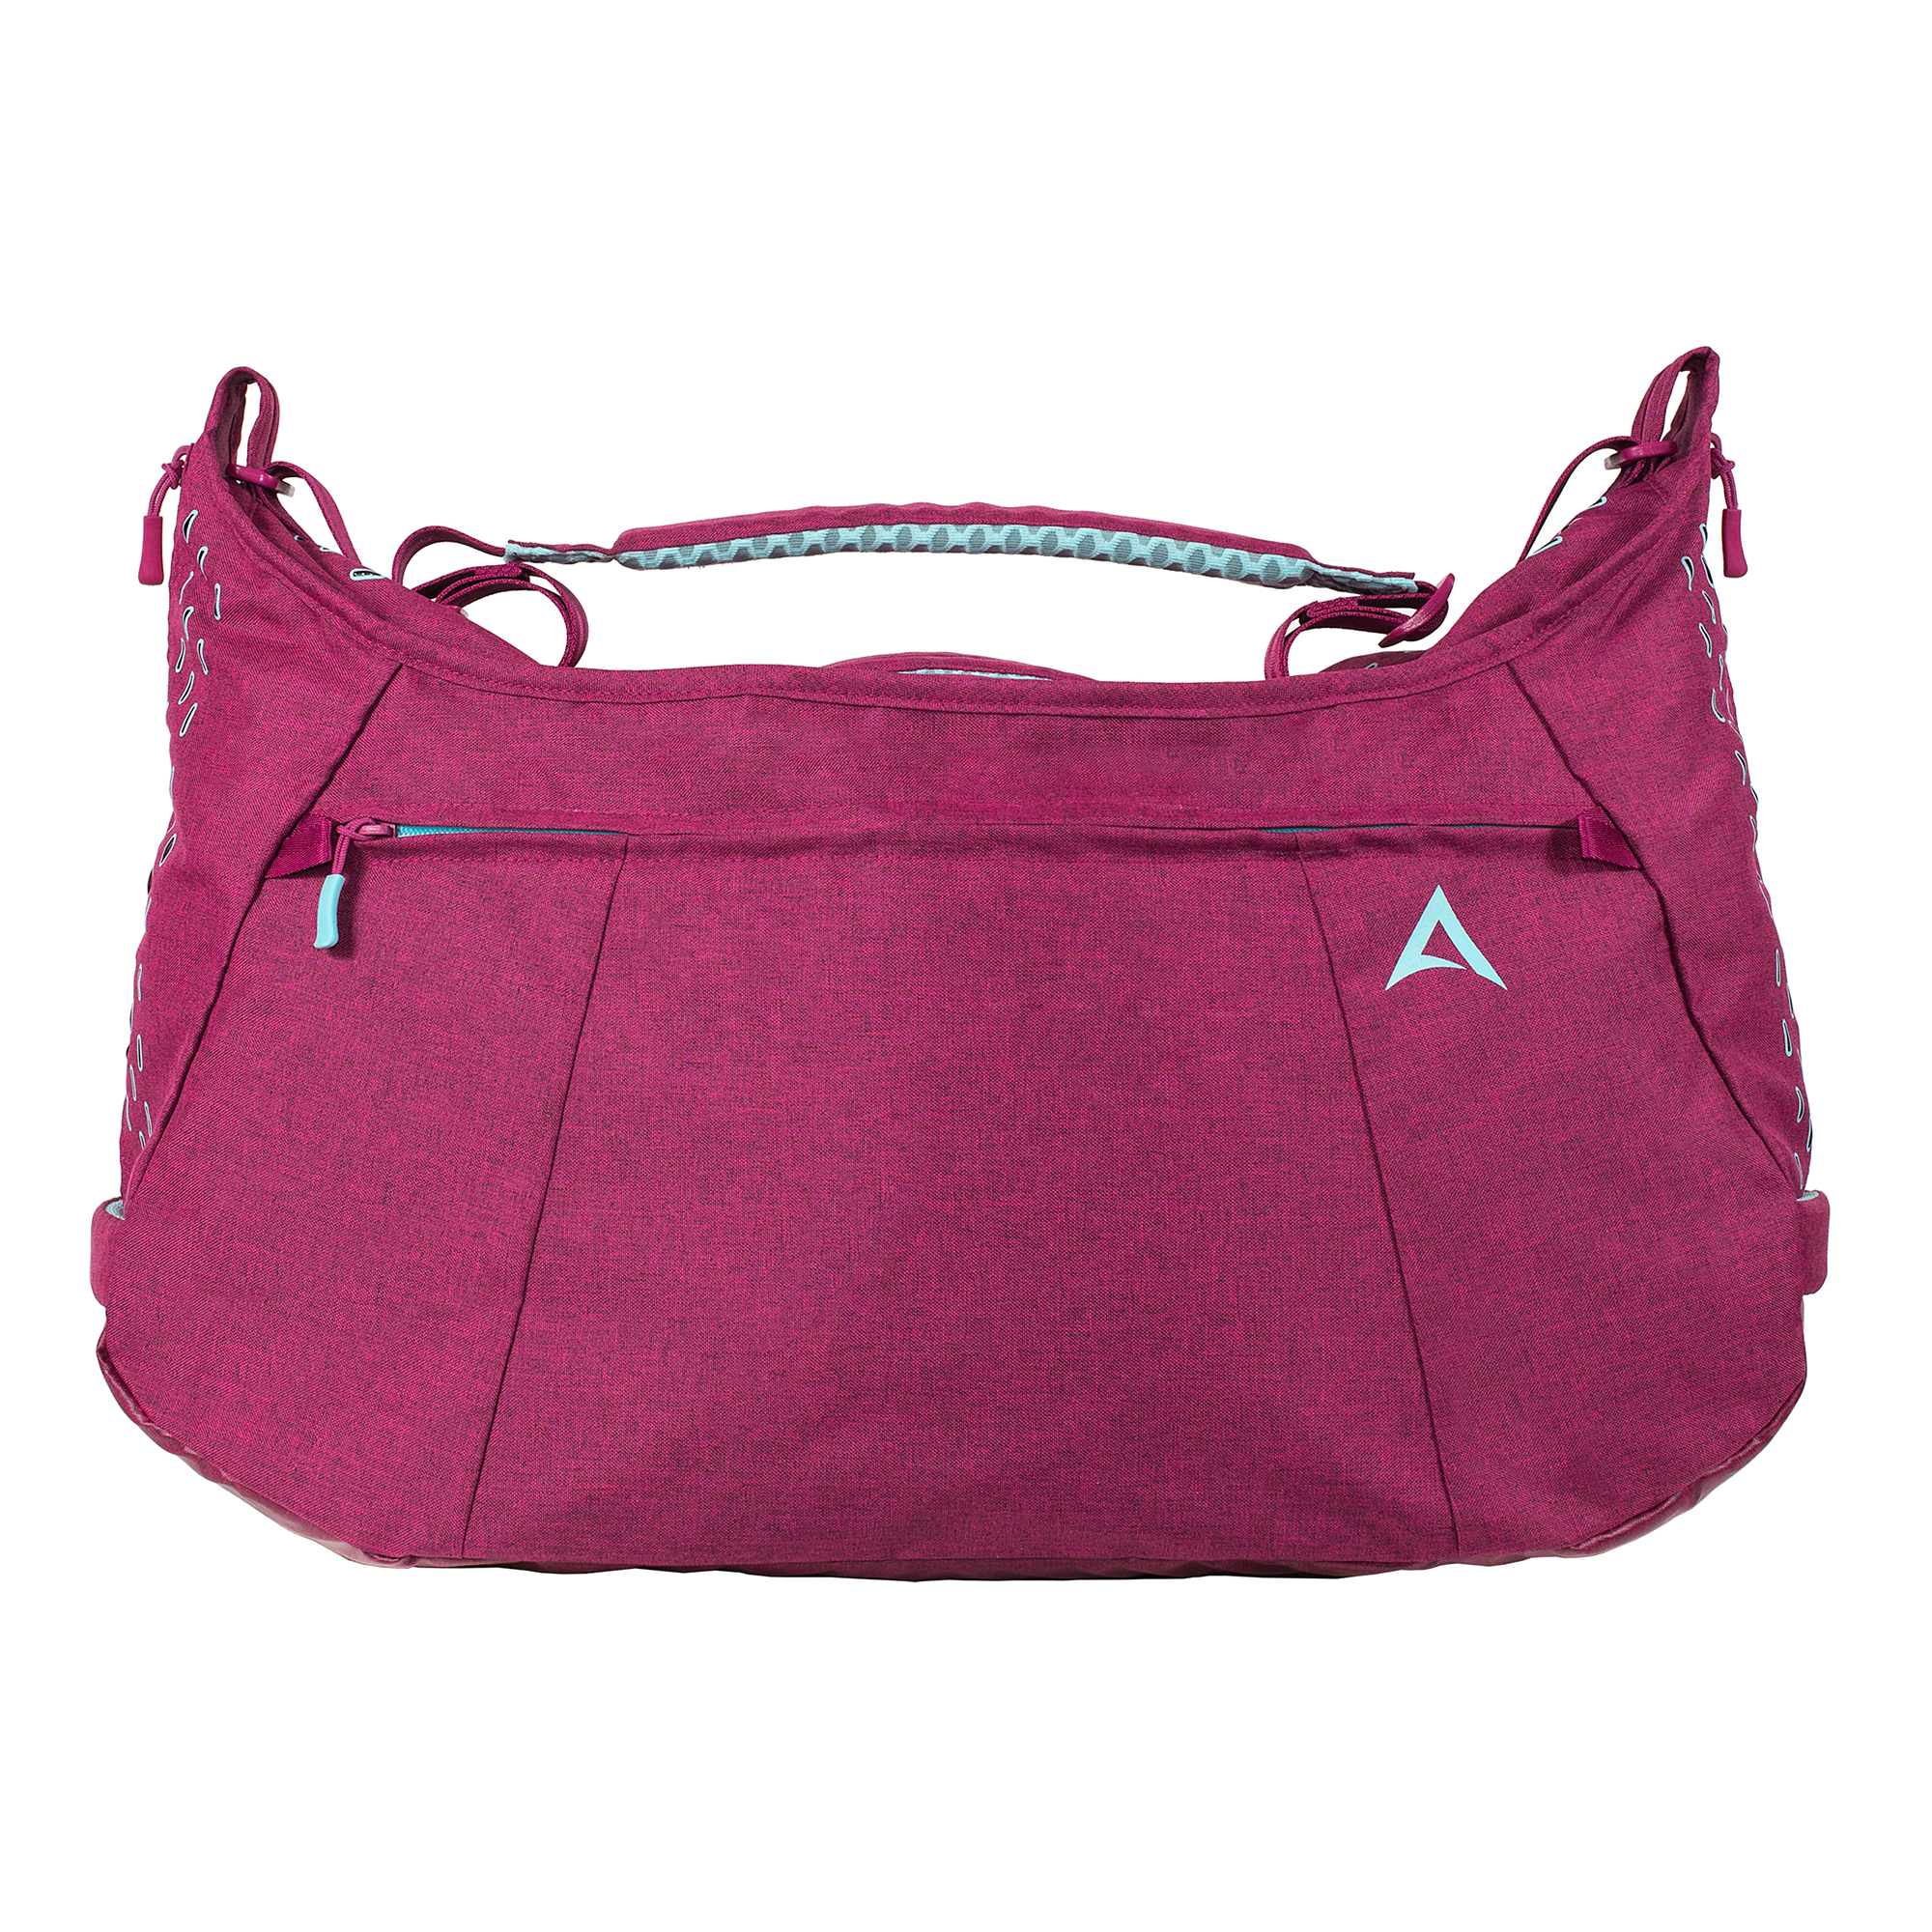 Apera Performance Duffle Powerberry/Arctic Blue Accents - image 3 of 5